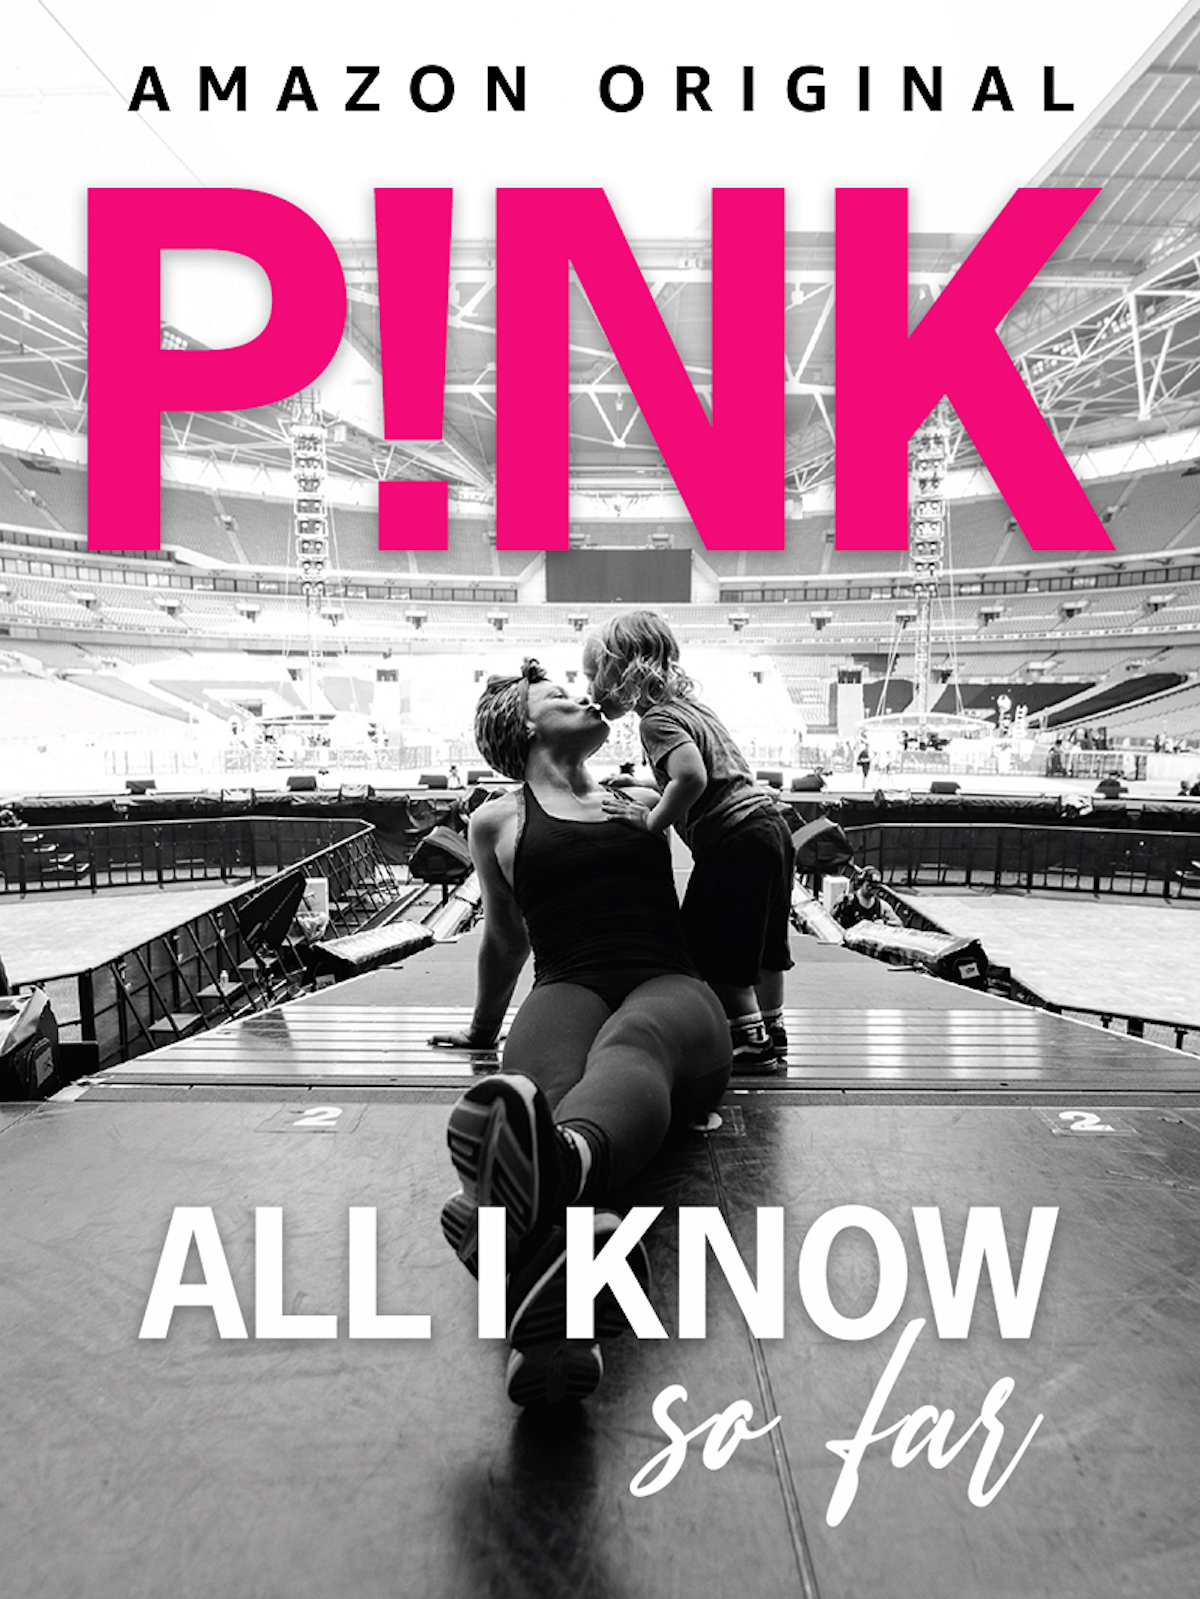 Pink: All I Know Amazon documentary poster